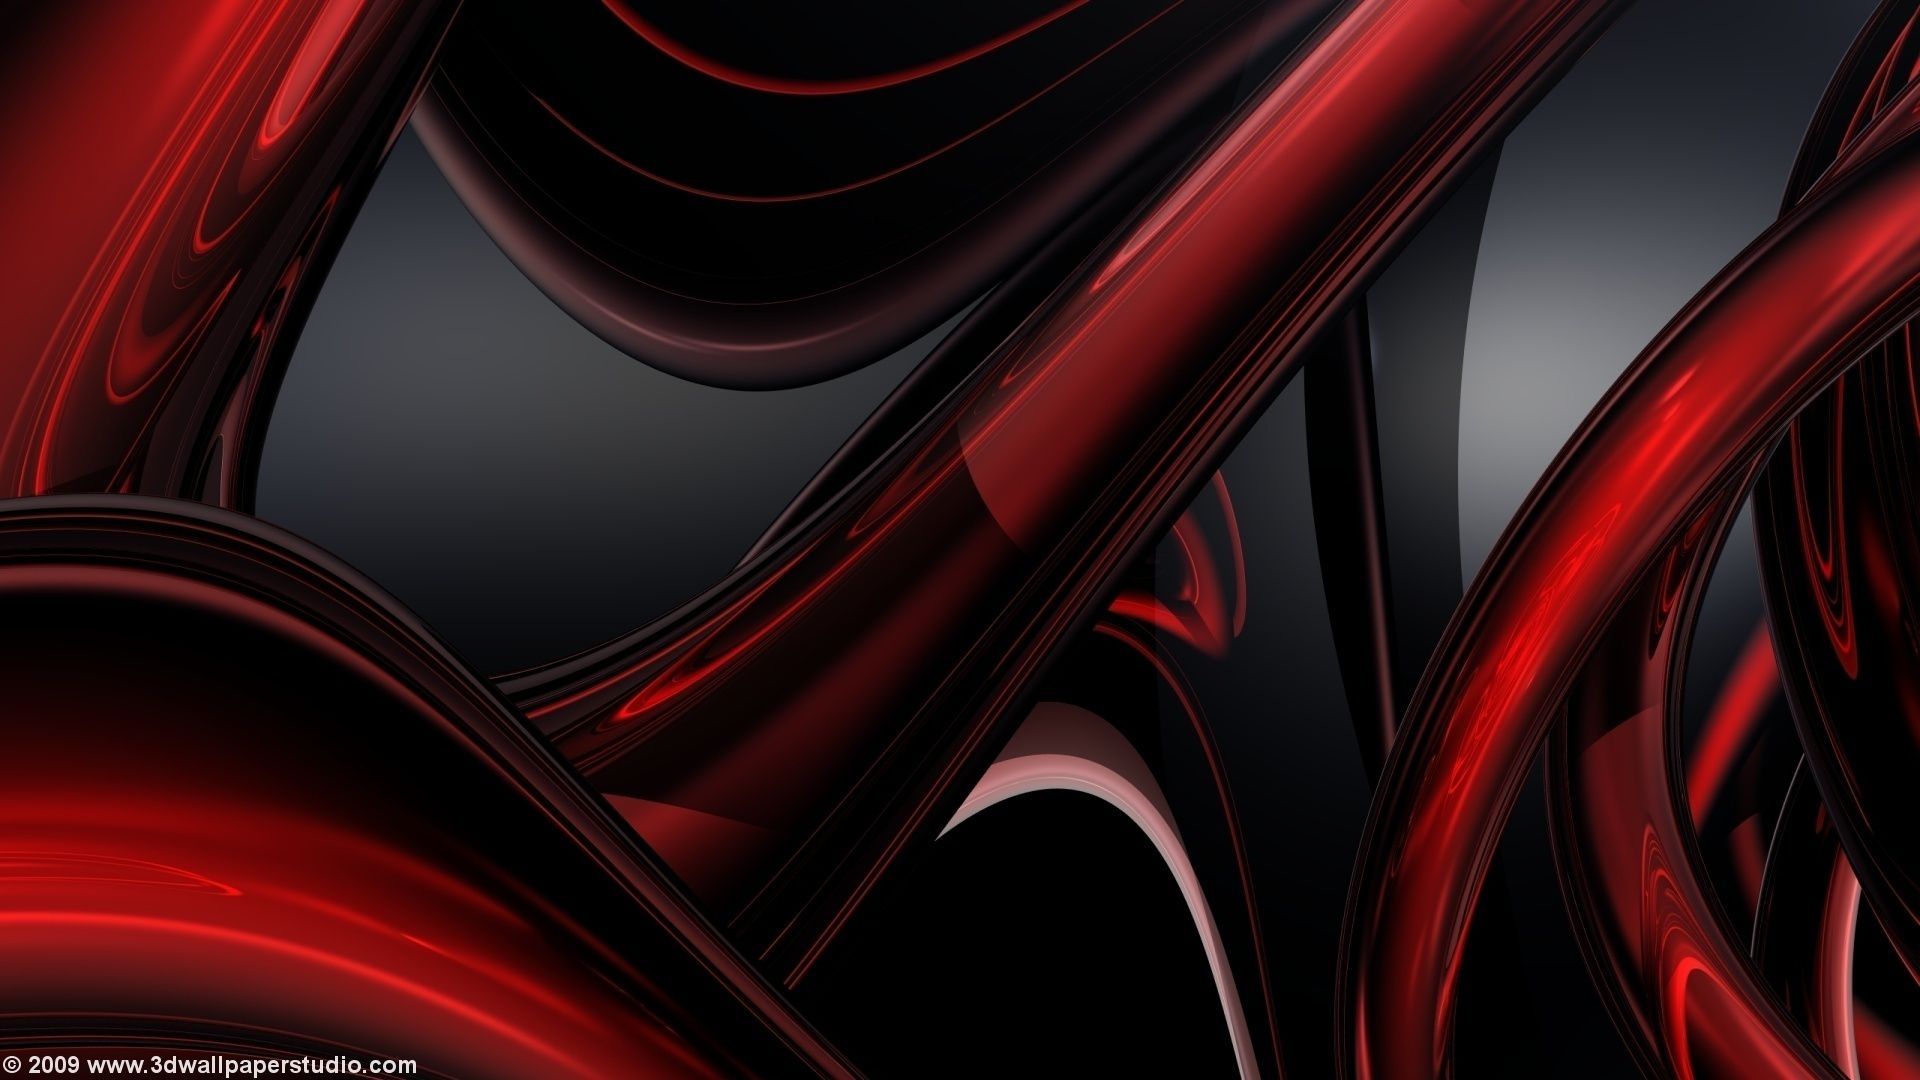 Red And Black Abstract Wallpaper 1920×1080 Black And